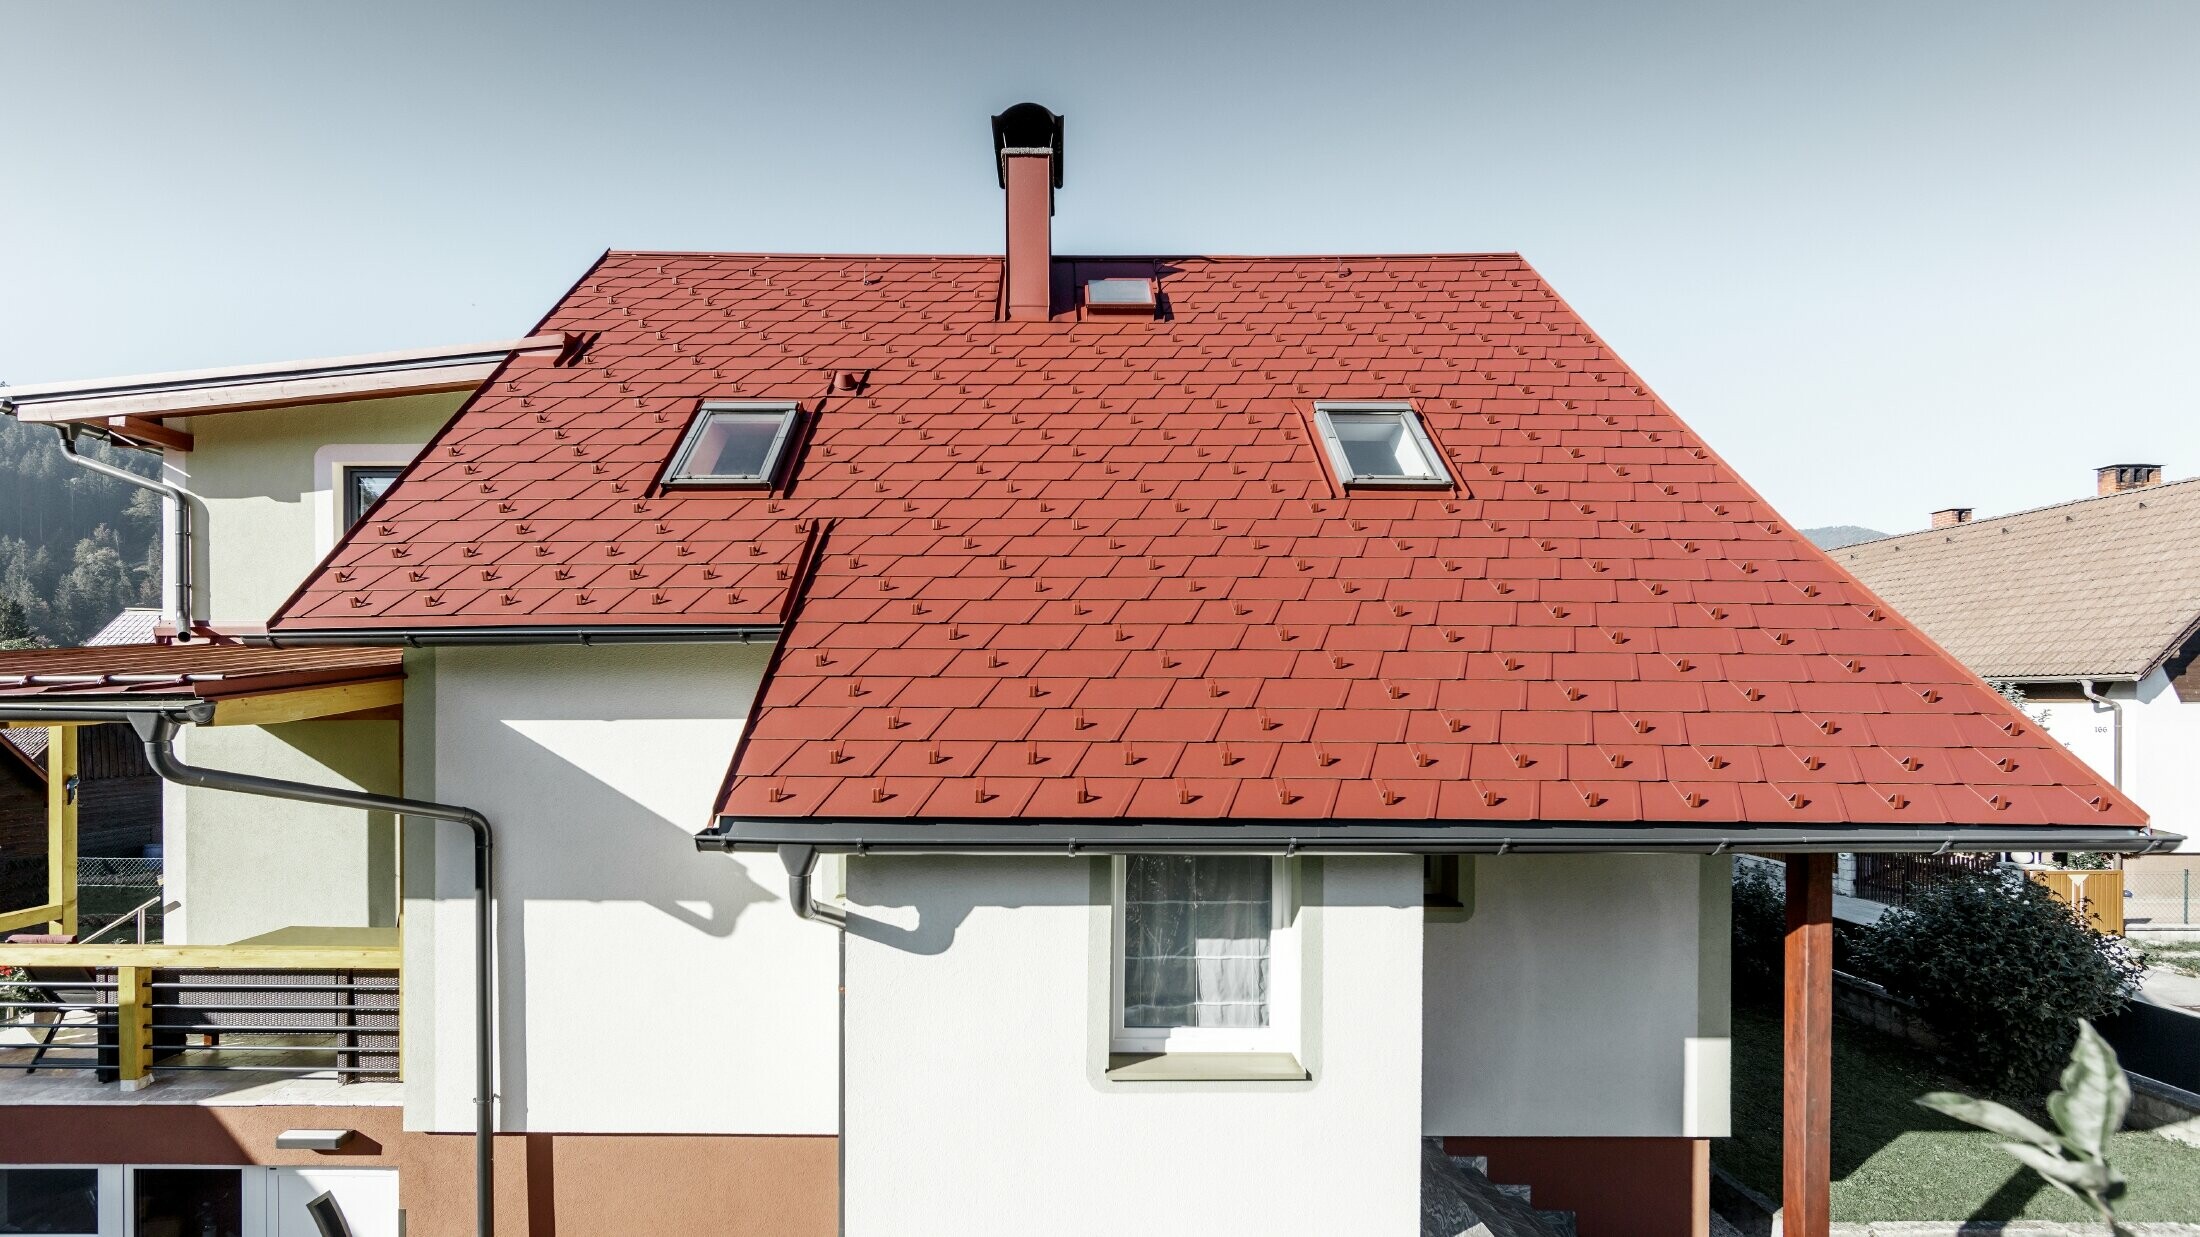 Refurbished detached house with the new PREFA roof shingle – in this case the DS.19 in oxide red was used.